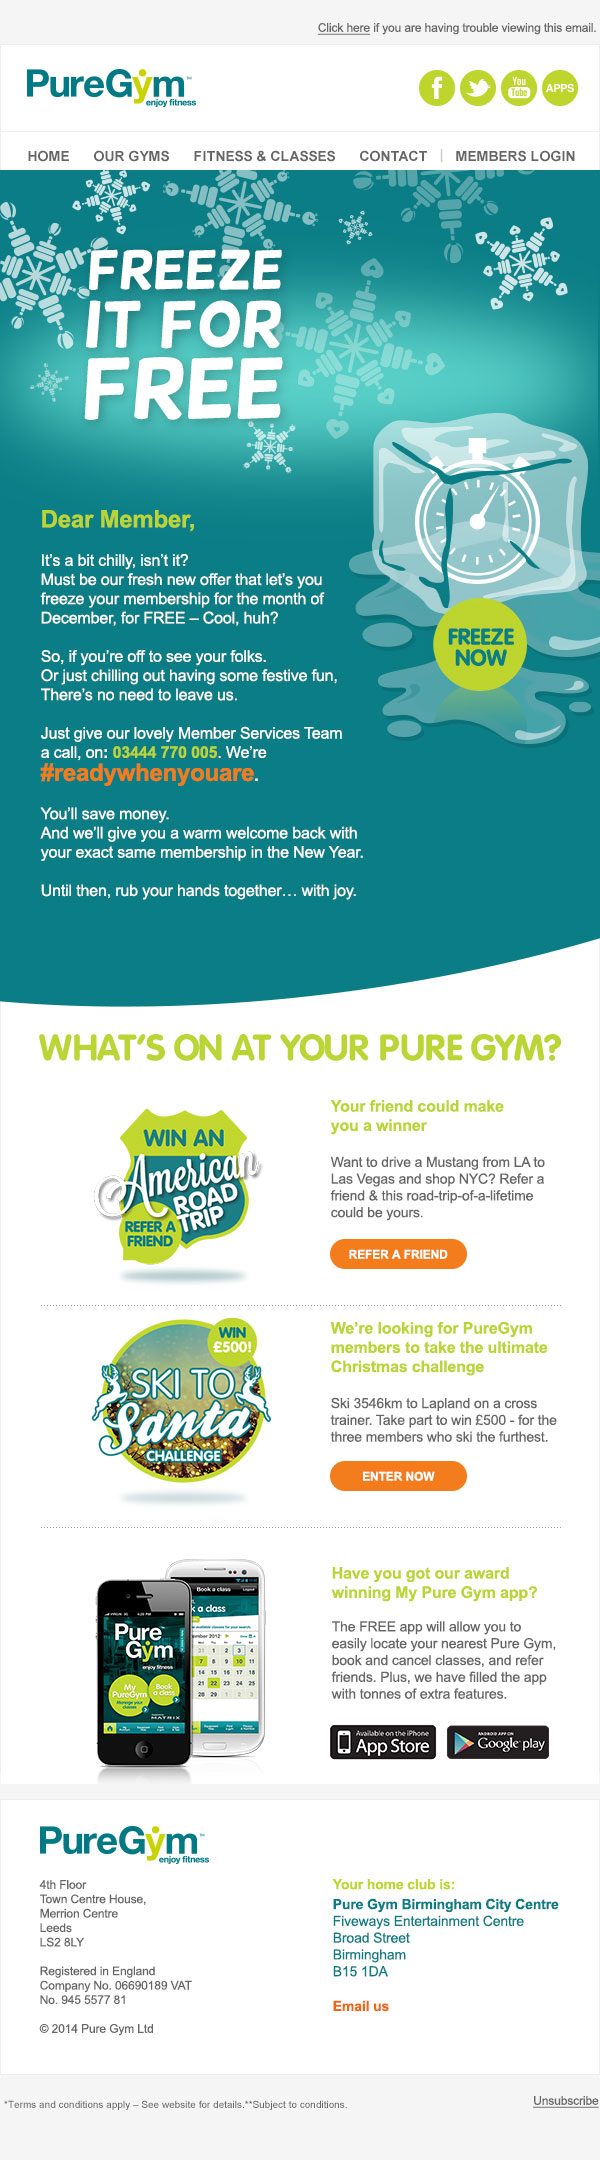 PureGym: Marketing - Freeze it For Free Email - Desktop